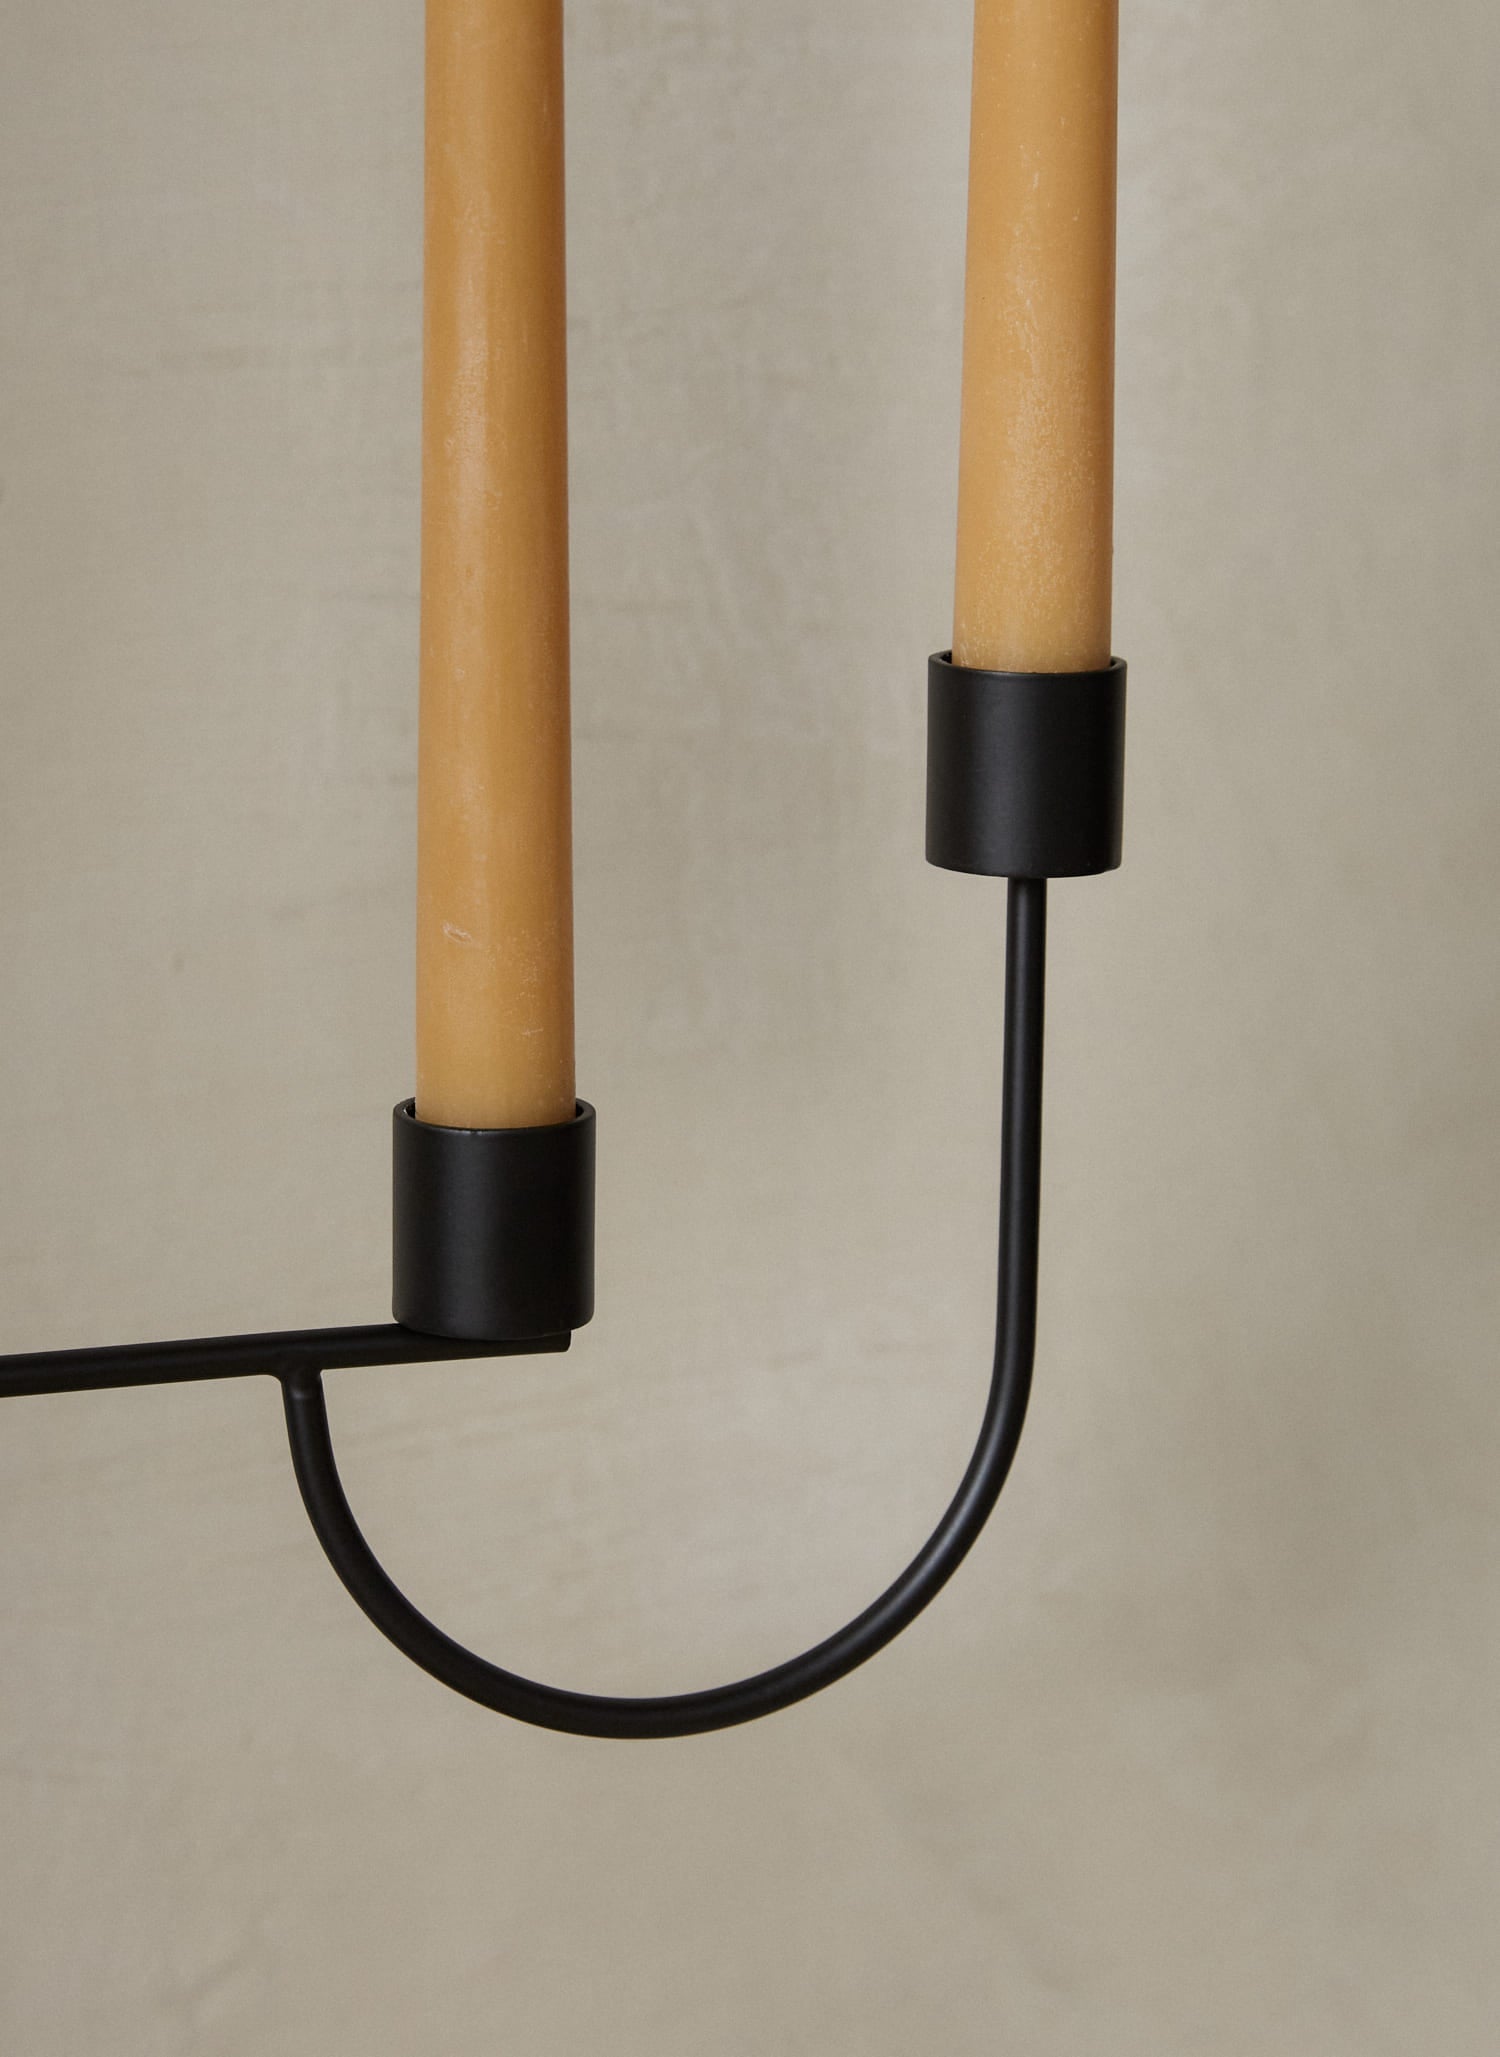 Avant Candelabra. An expression of balance, this modern, geometric candelabra features a voluminous cone base and three candle holders in black powder coated metal with a smooth finish. 